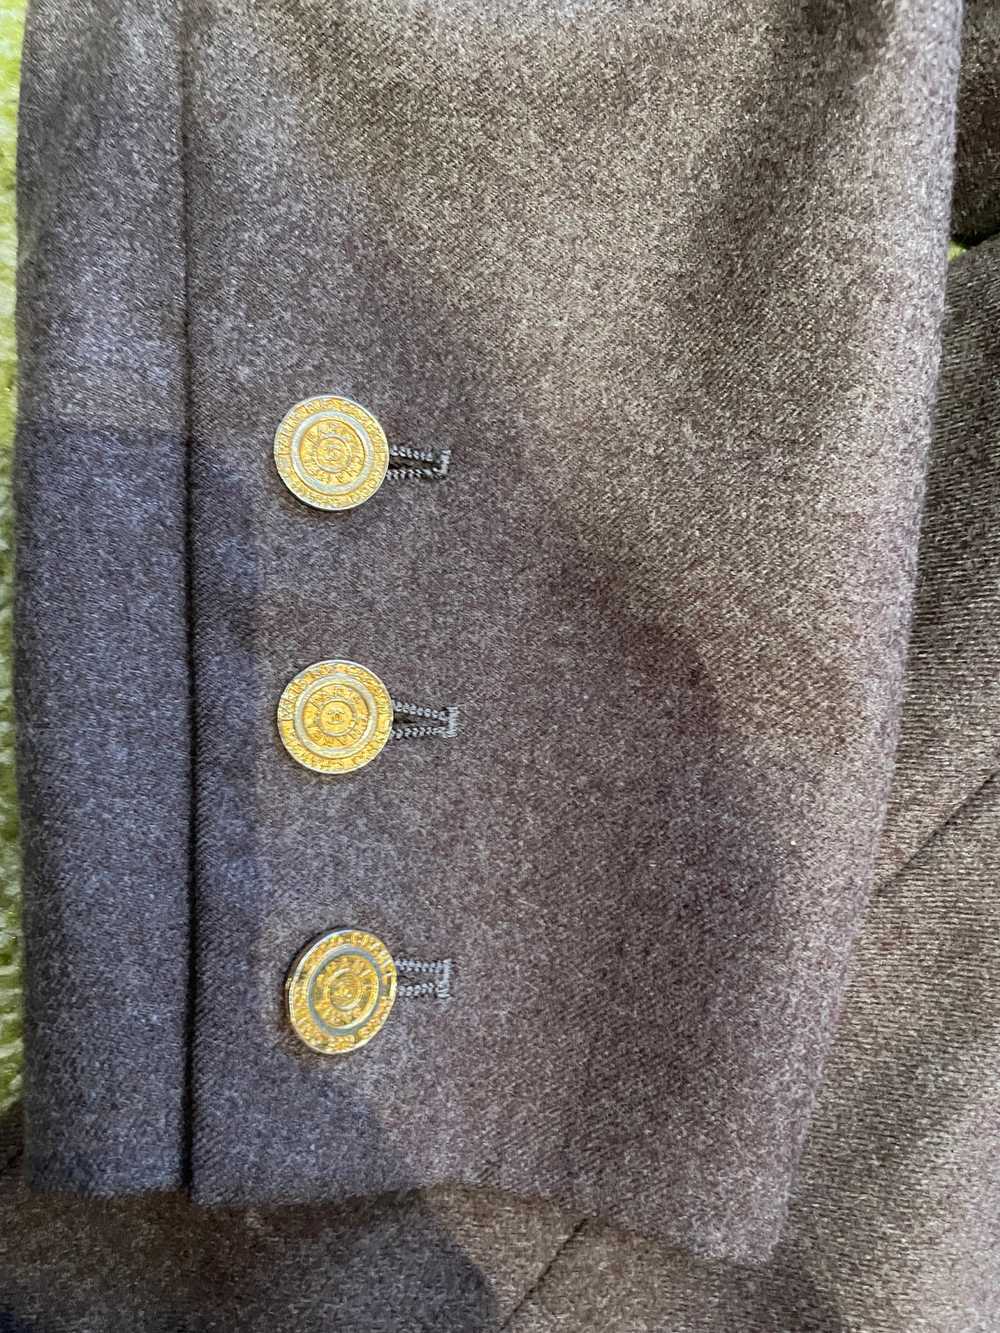 Chanel Brown Wool Suit (Size 8) - image 5